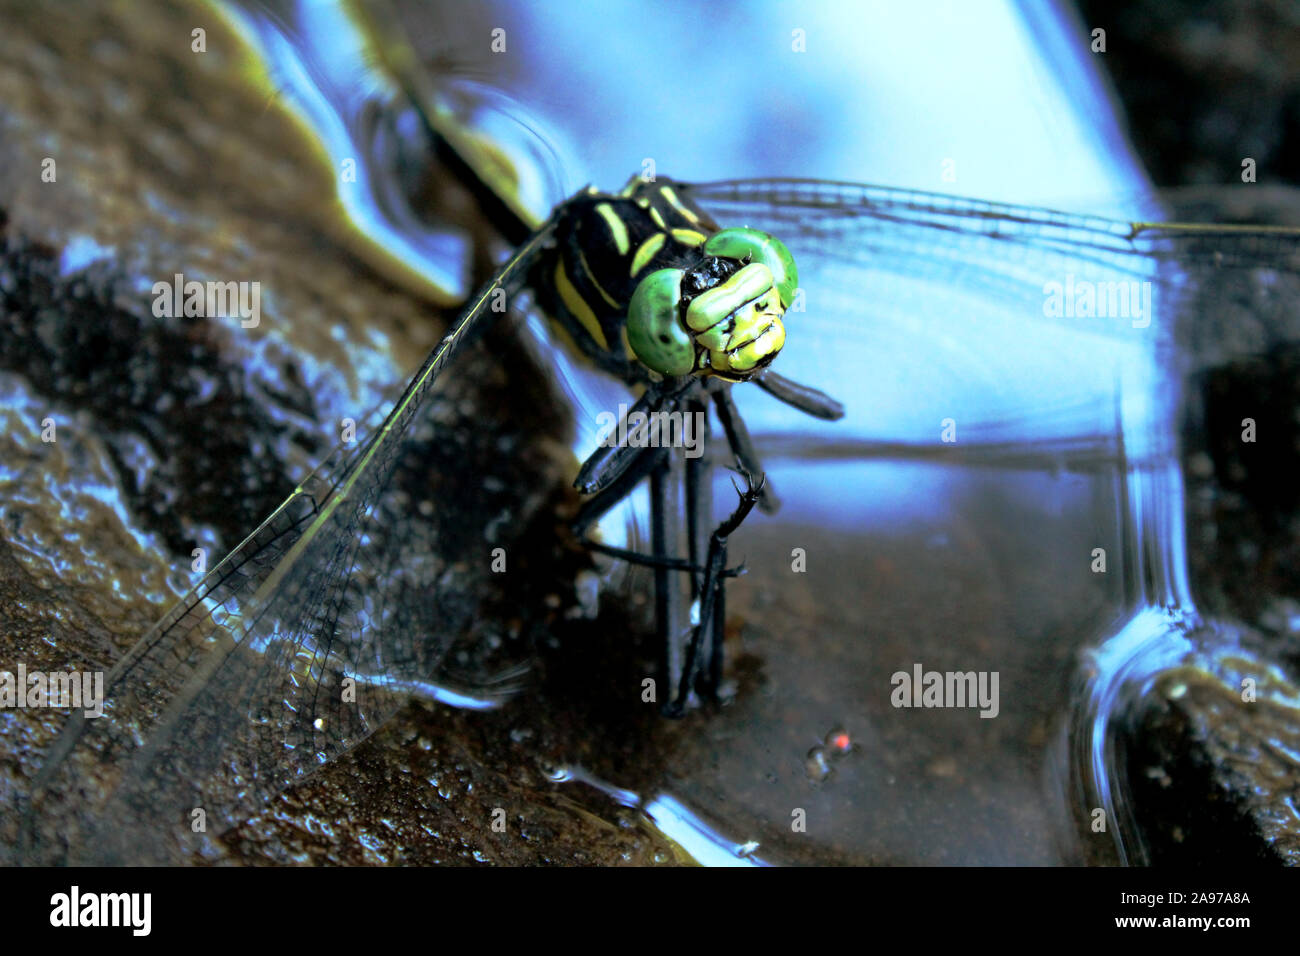 Dragon Fly close up Banque D'Images